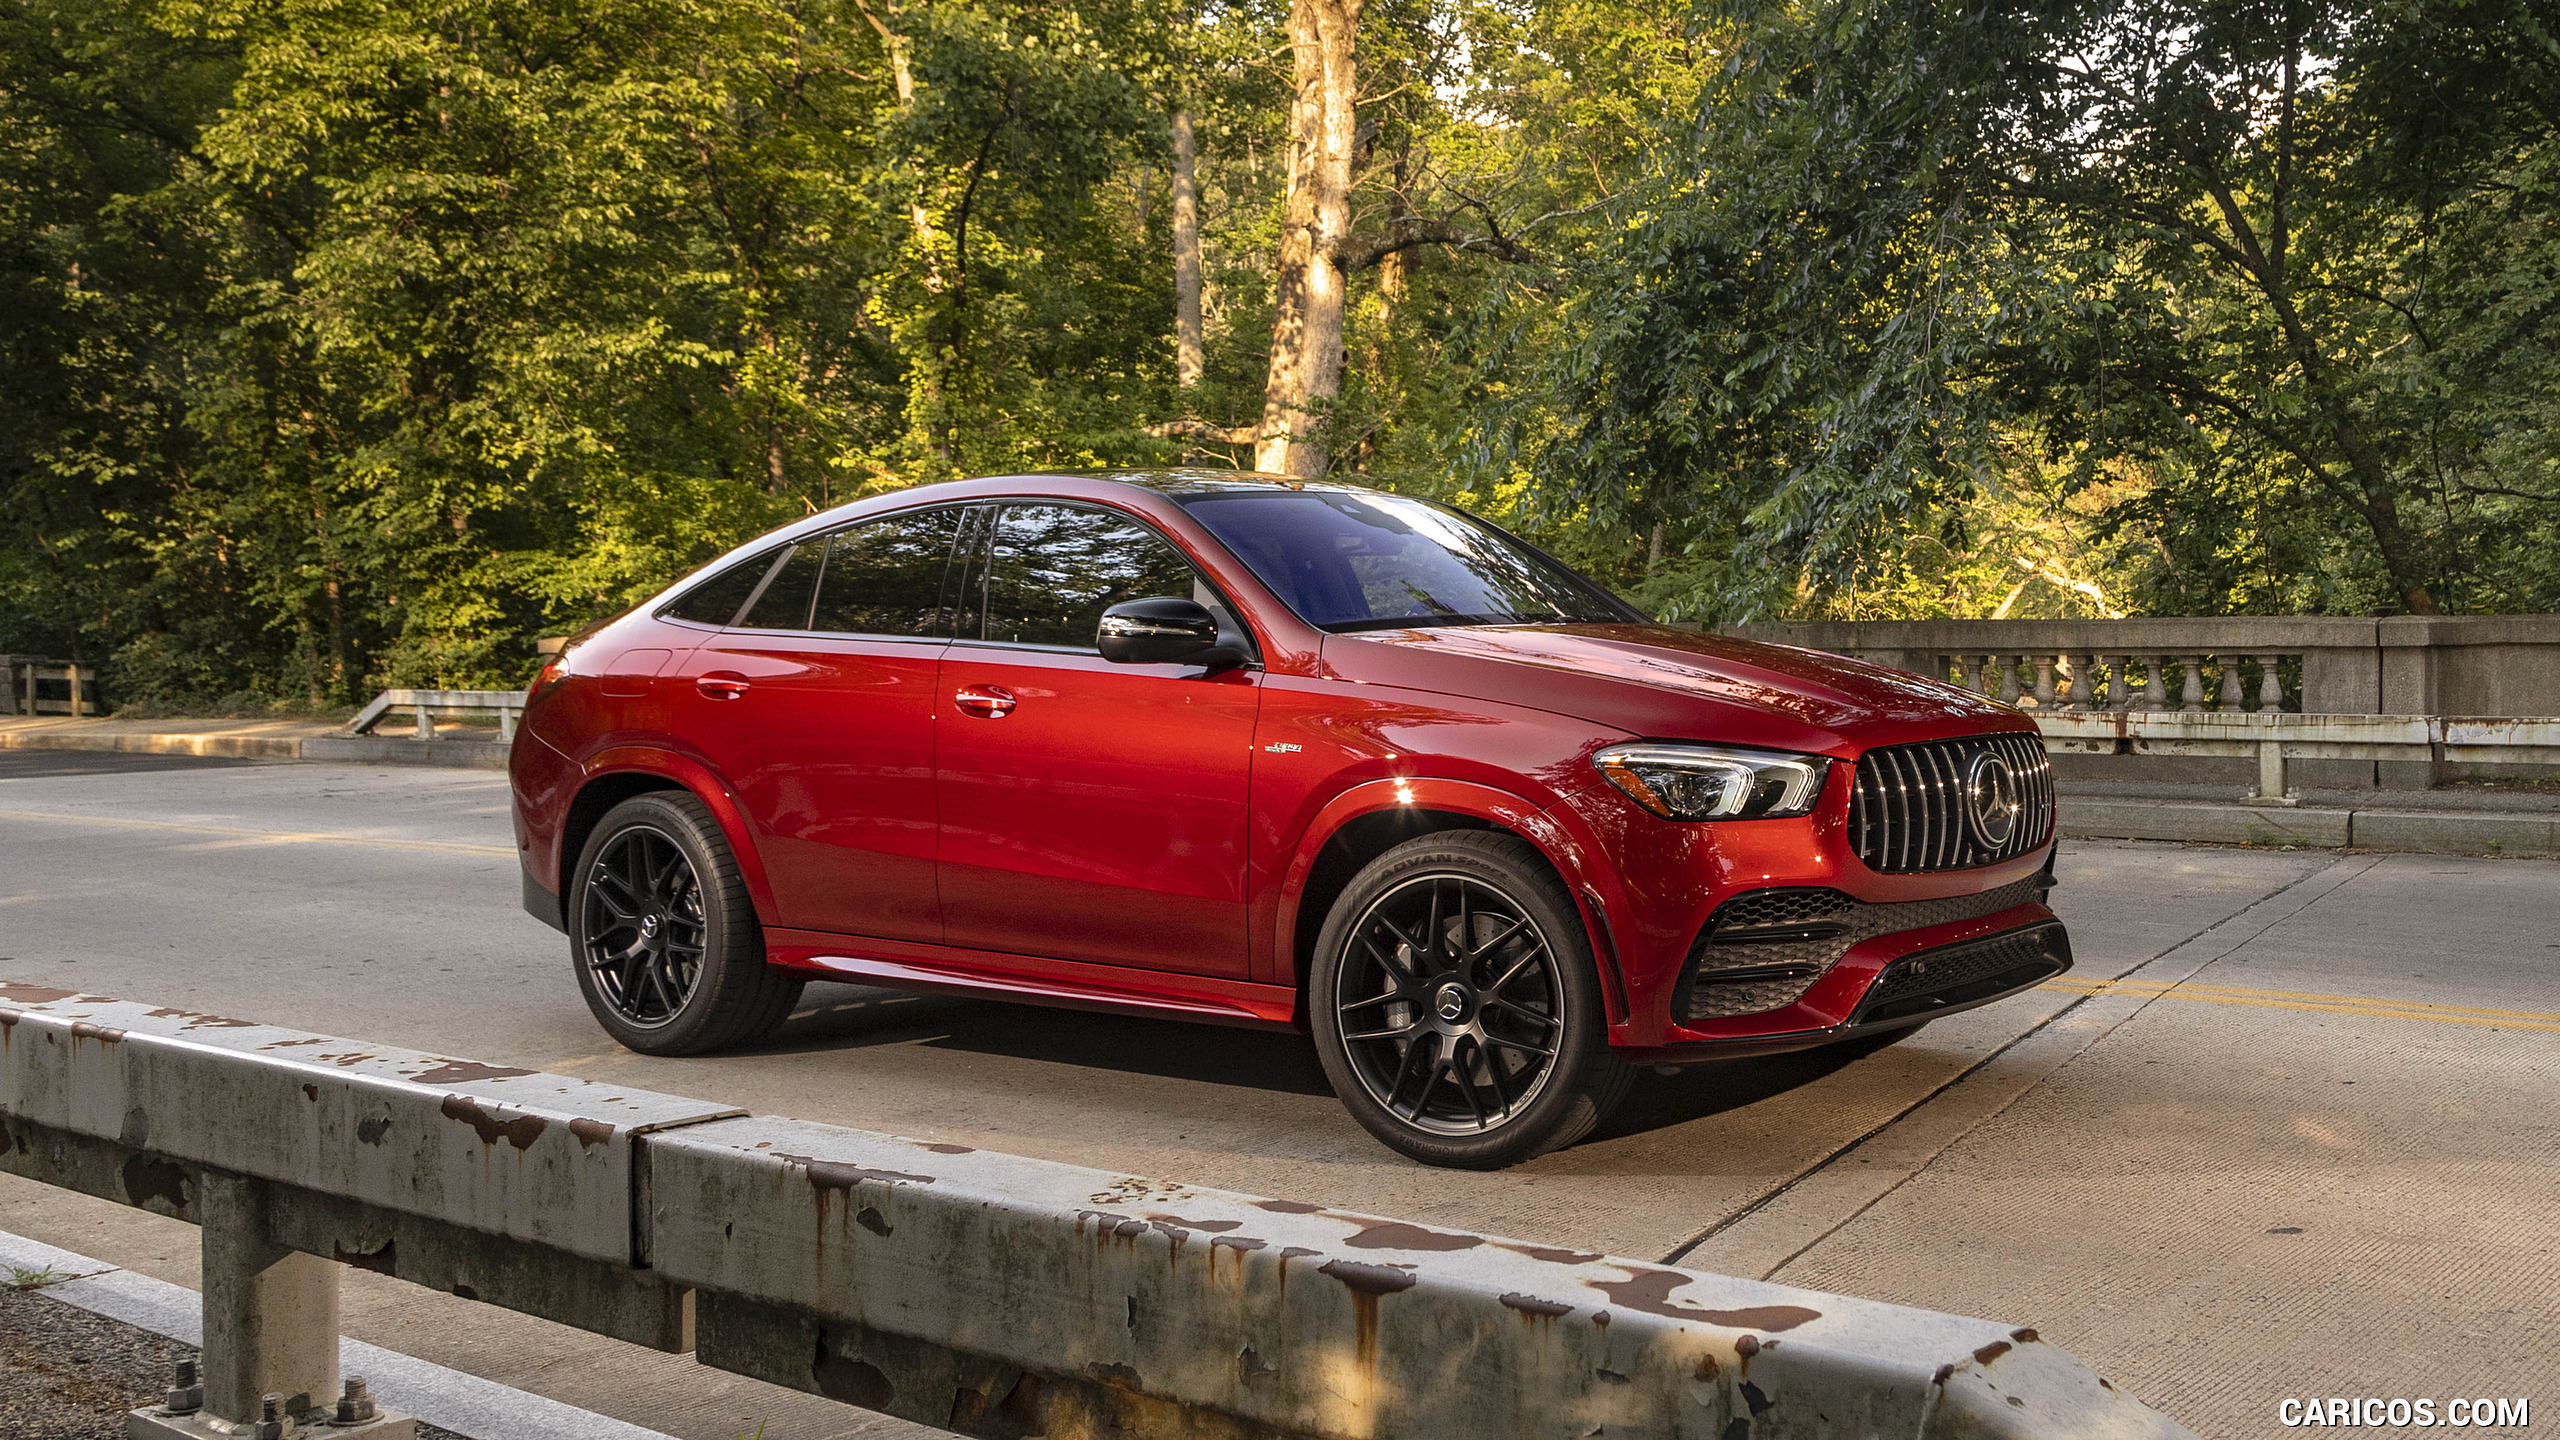 2021 Mercedes-AMG GLE 53 Coupe - Front Three-Quarter, #135 of 178